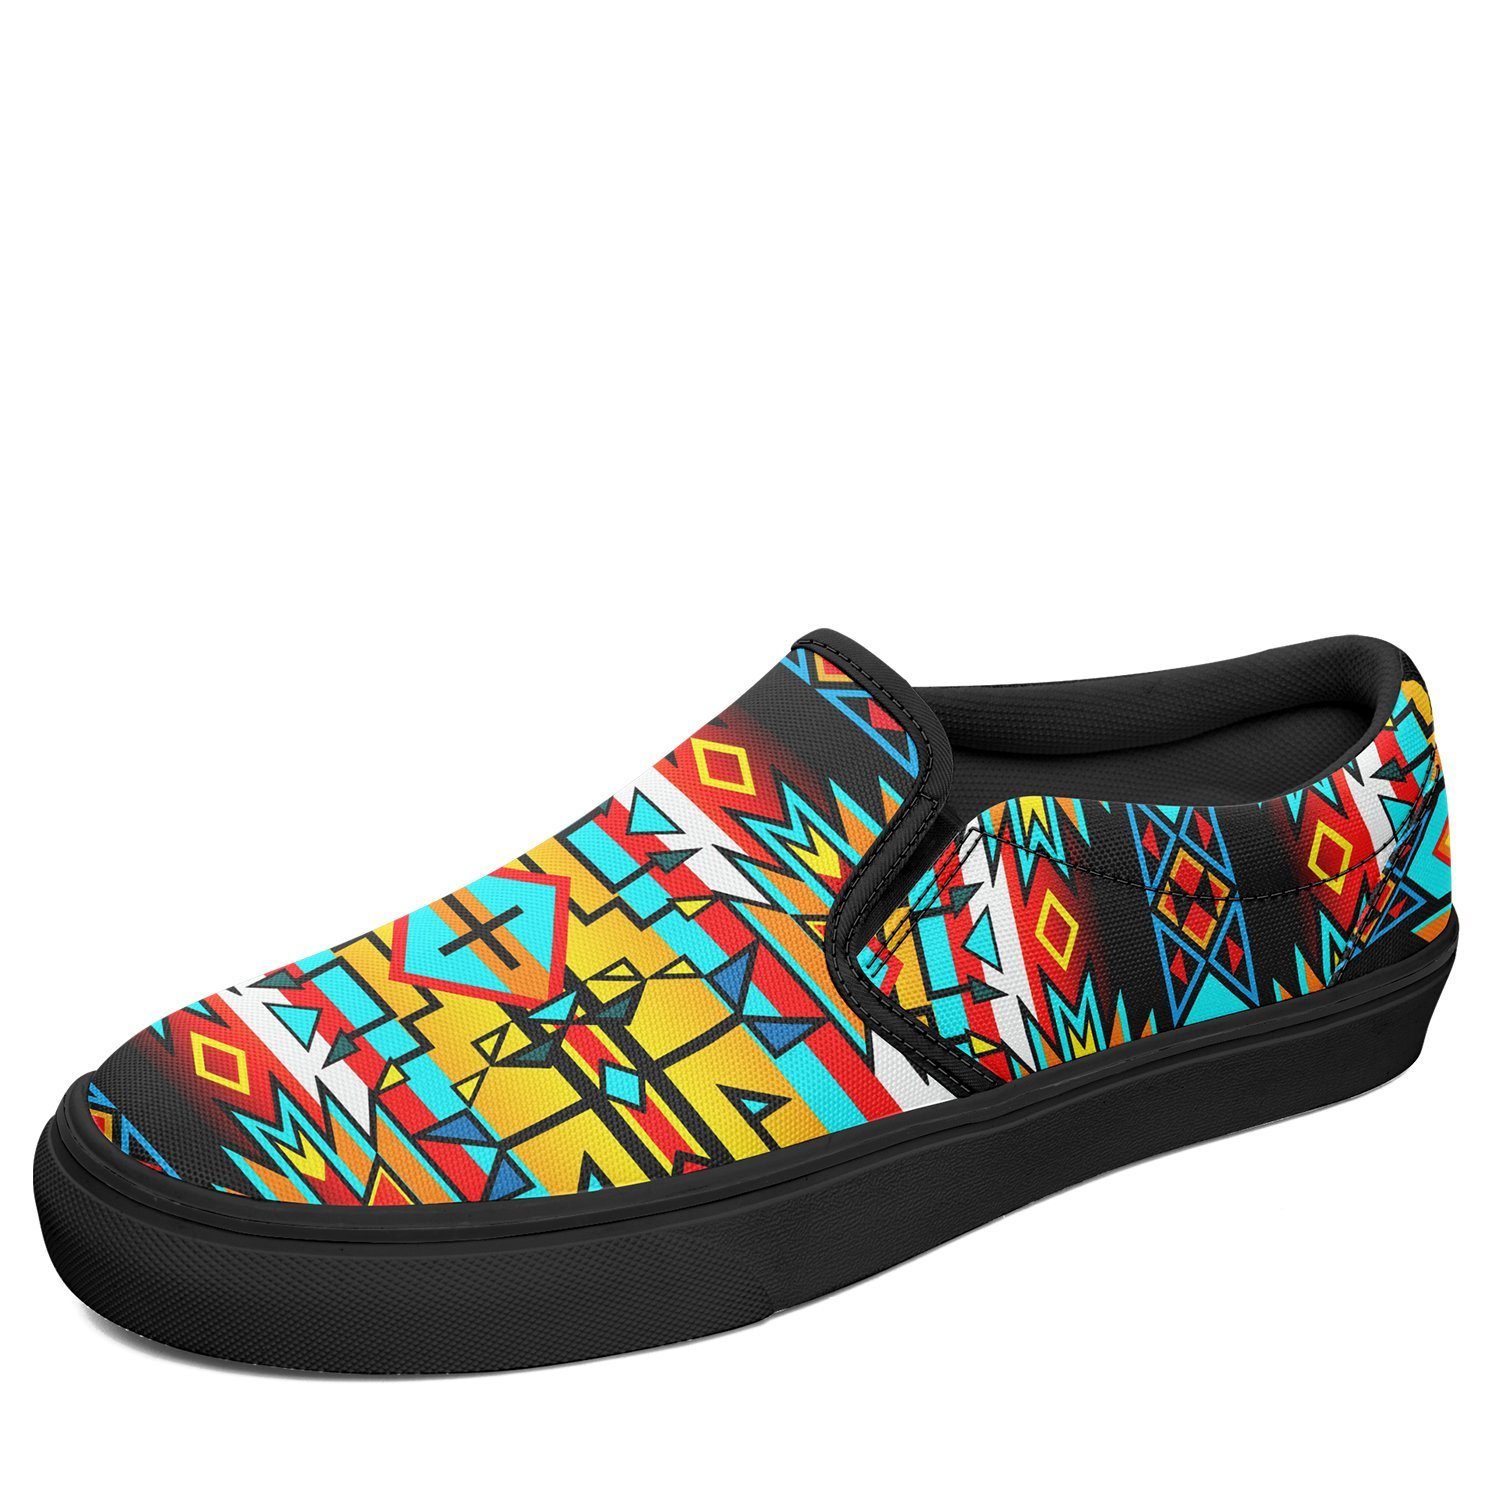 Force of Nature Twister Otoyimm Kid's Canvas Slip On Shoes 49 Dzine US Youth 1 / EUR 32 Black Sole 